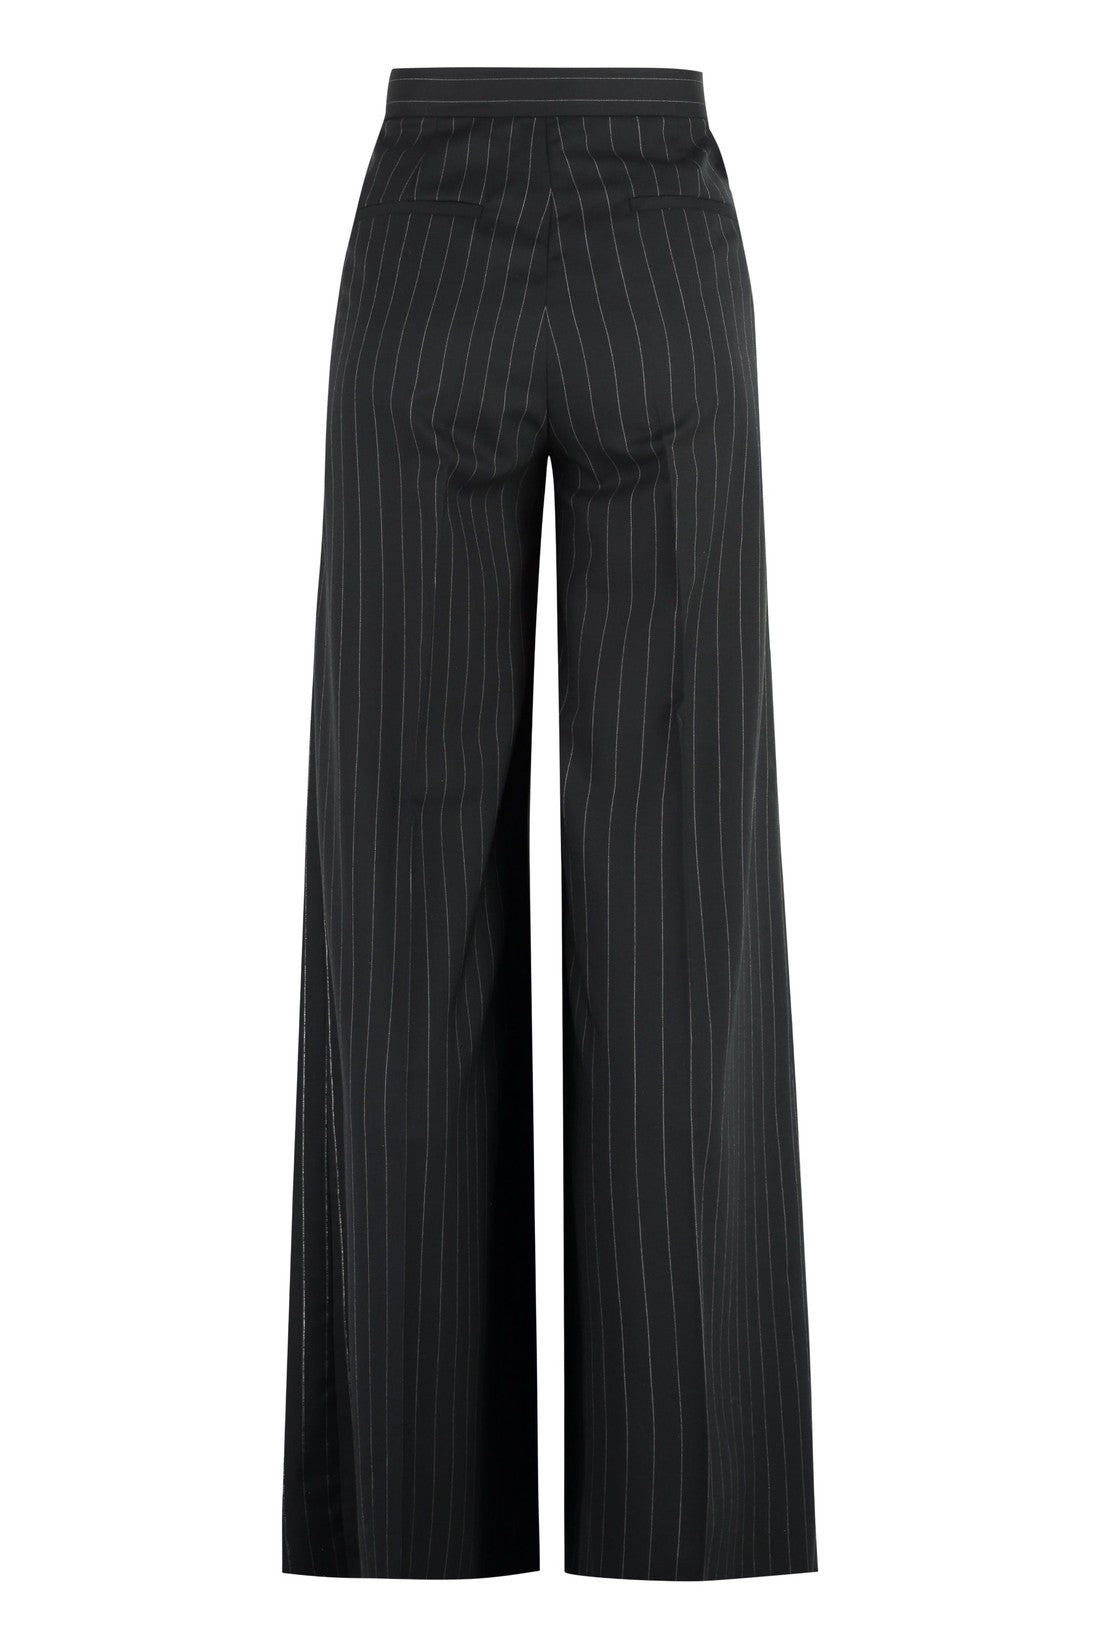 Max Mara-OUTLET-SALE-Baba Wool wide-leg trousers-ARCHIVIST